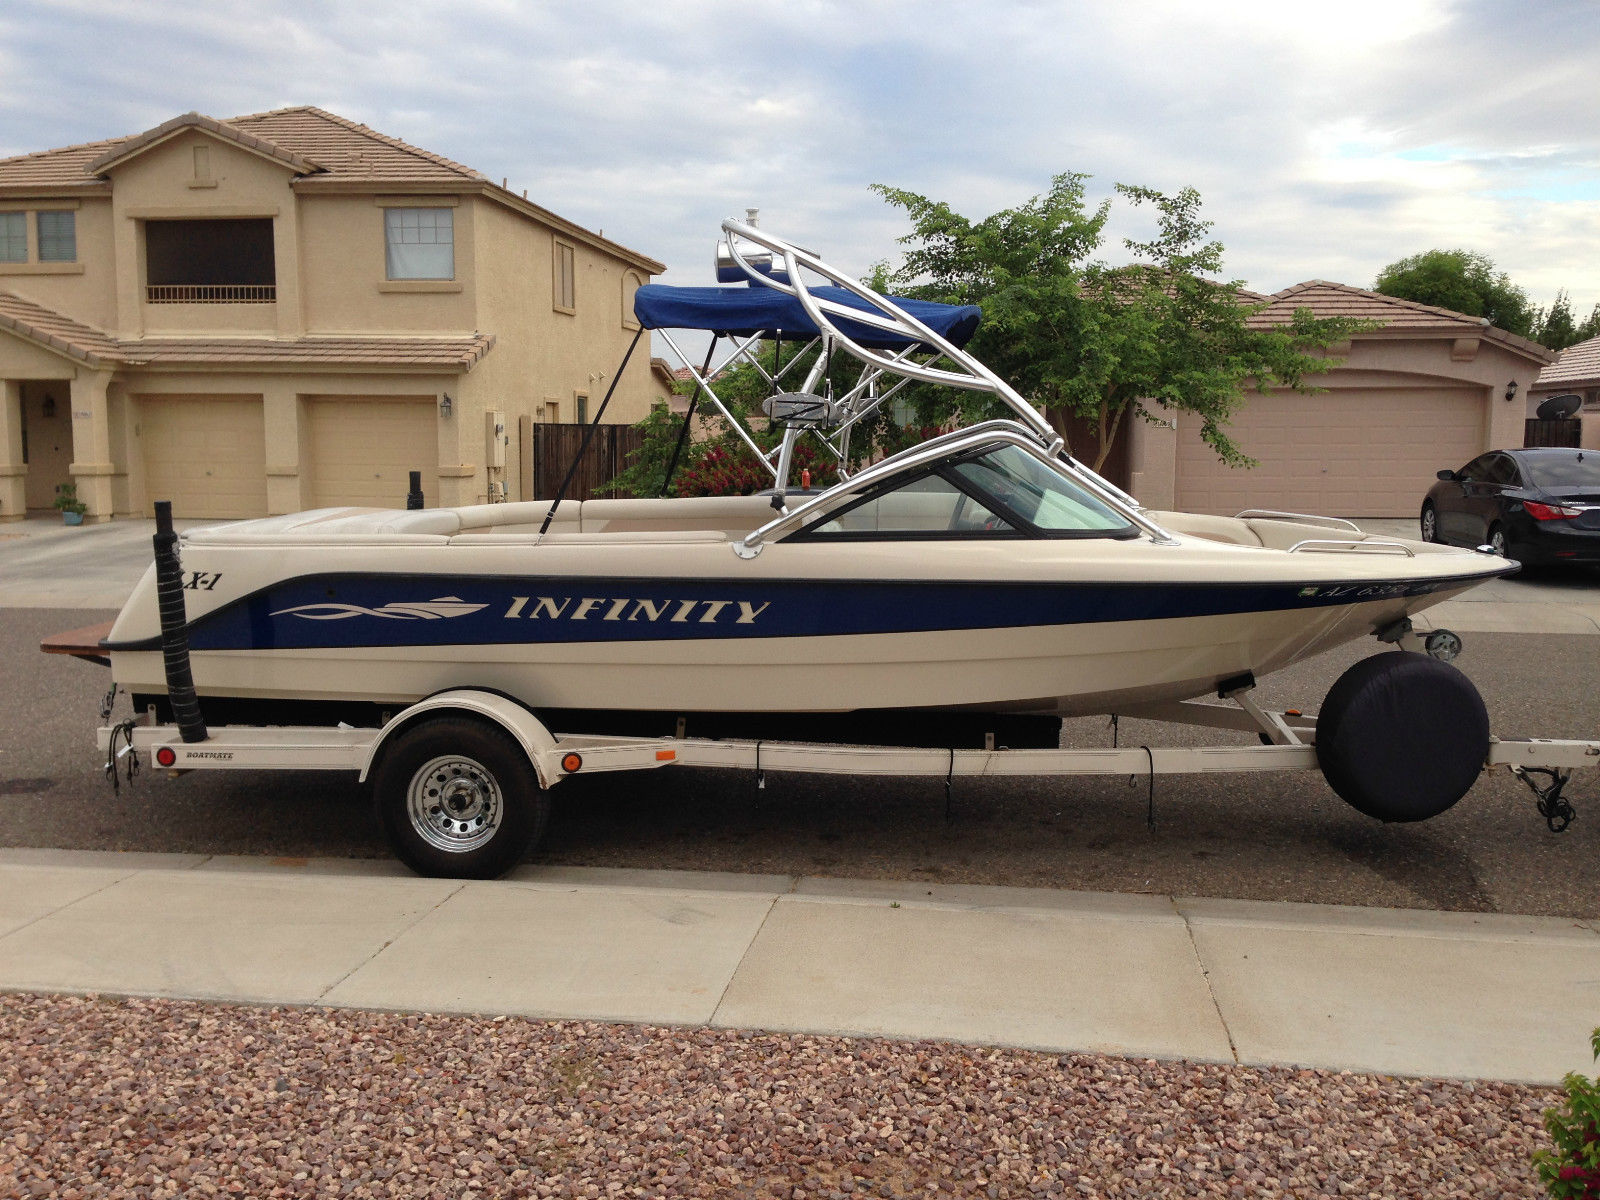 Infinity ZX-1 2005 for sale for $26,000 - Boats-from-USA.com